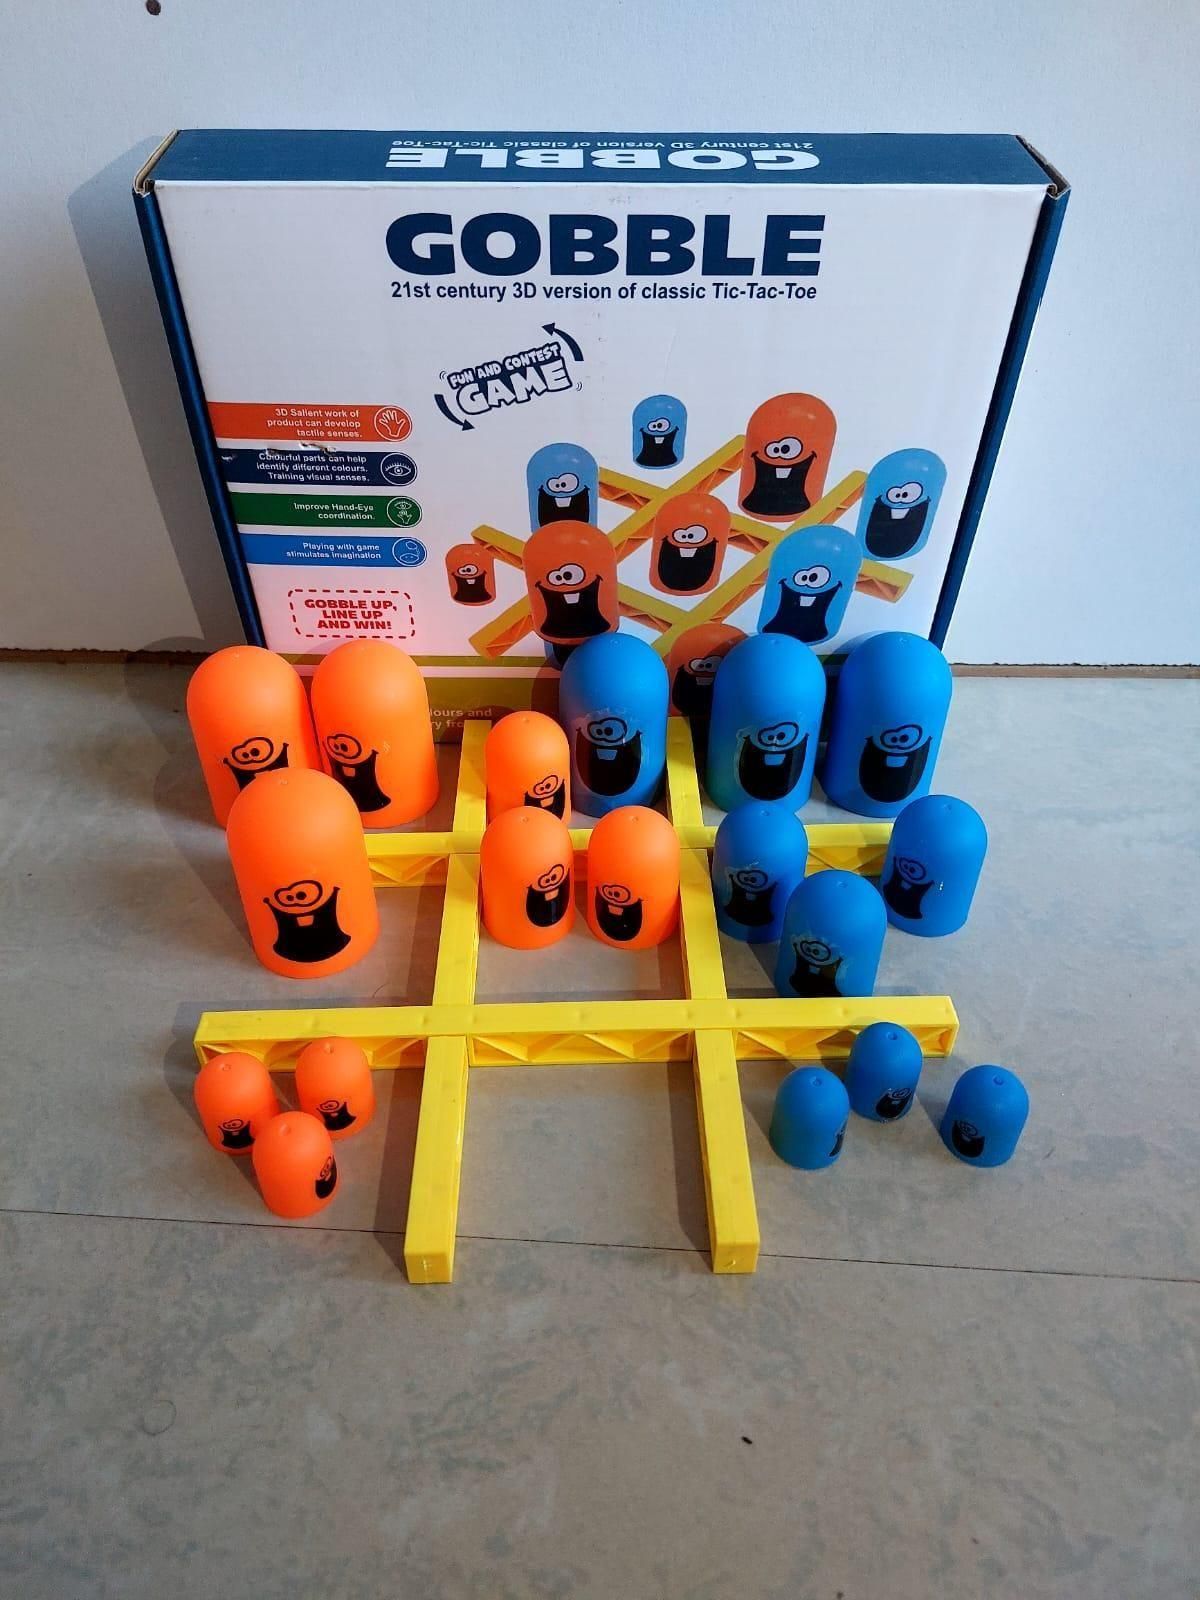 Gobble Board Game Fun and Strategic Interactive Toy for Kids